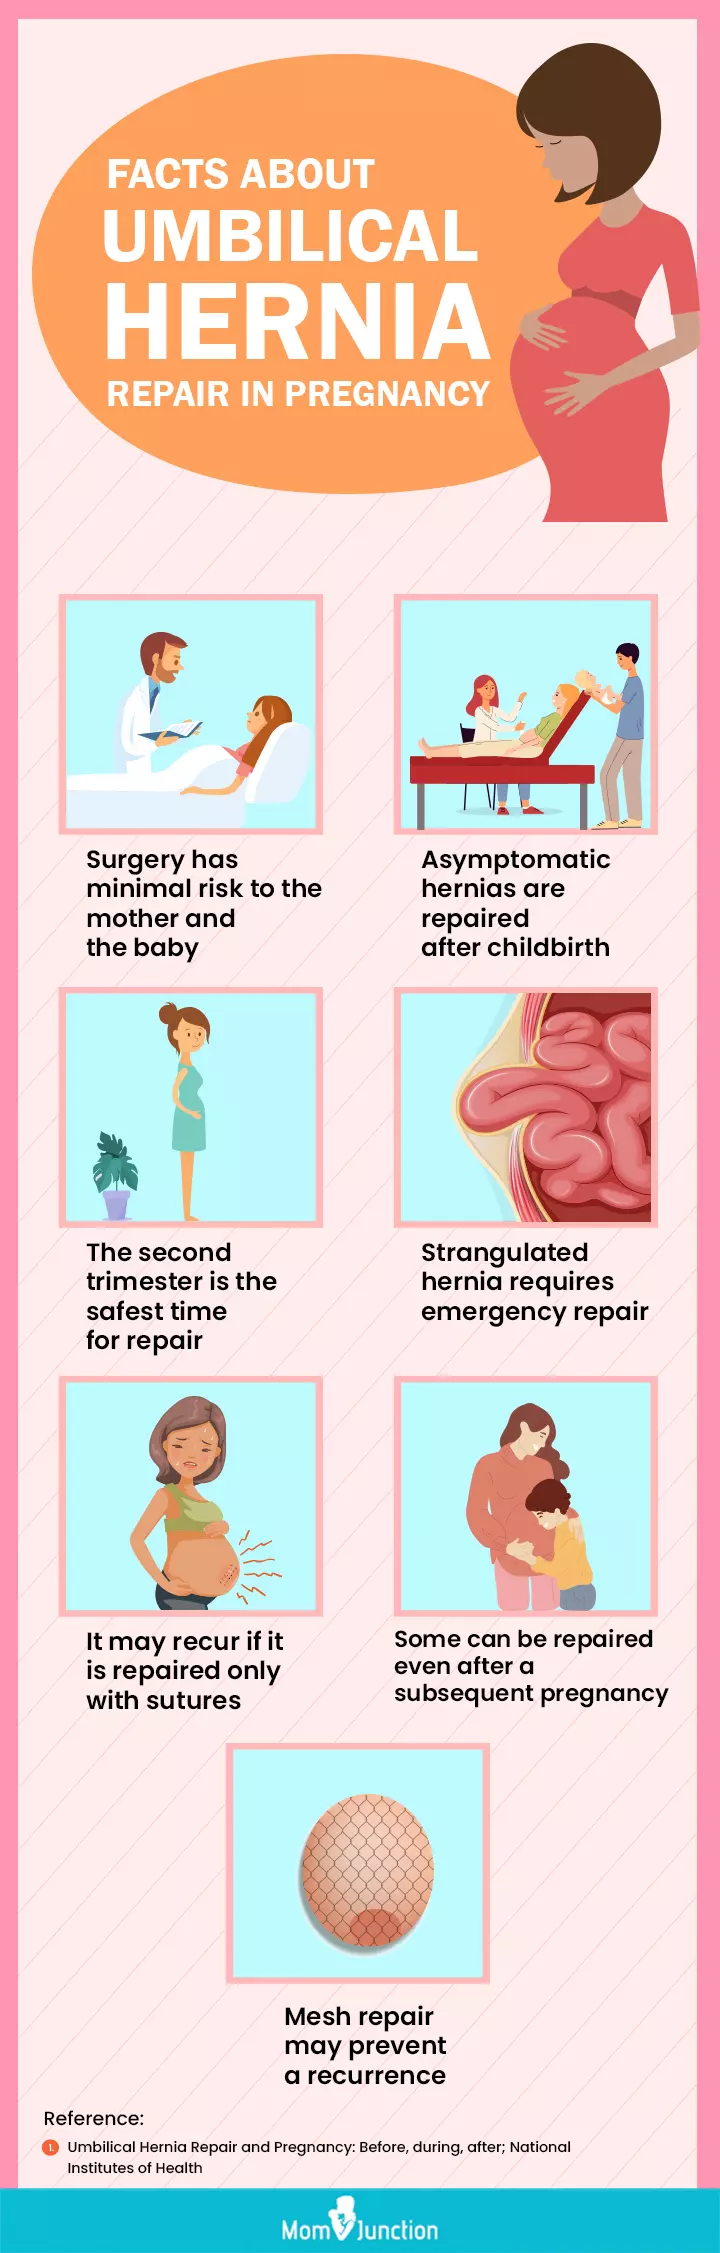 facts about umbilical hernia repair during pregnancy (infographic)